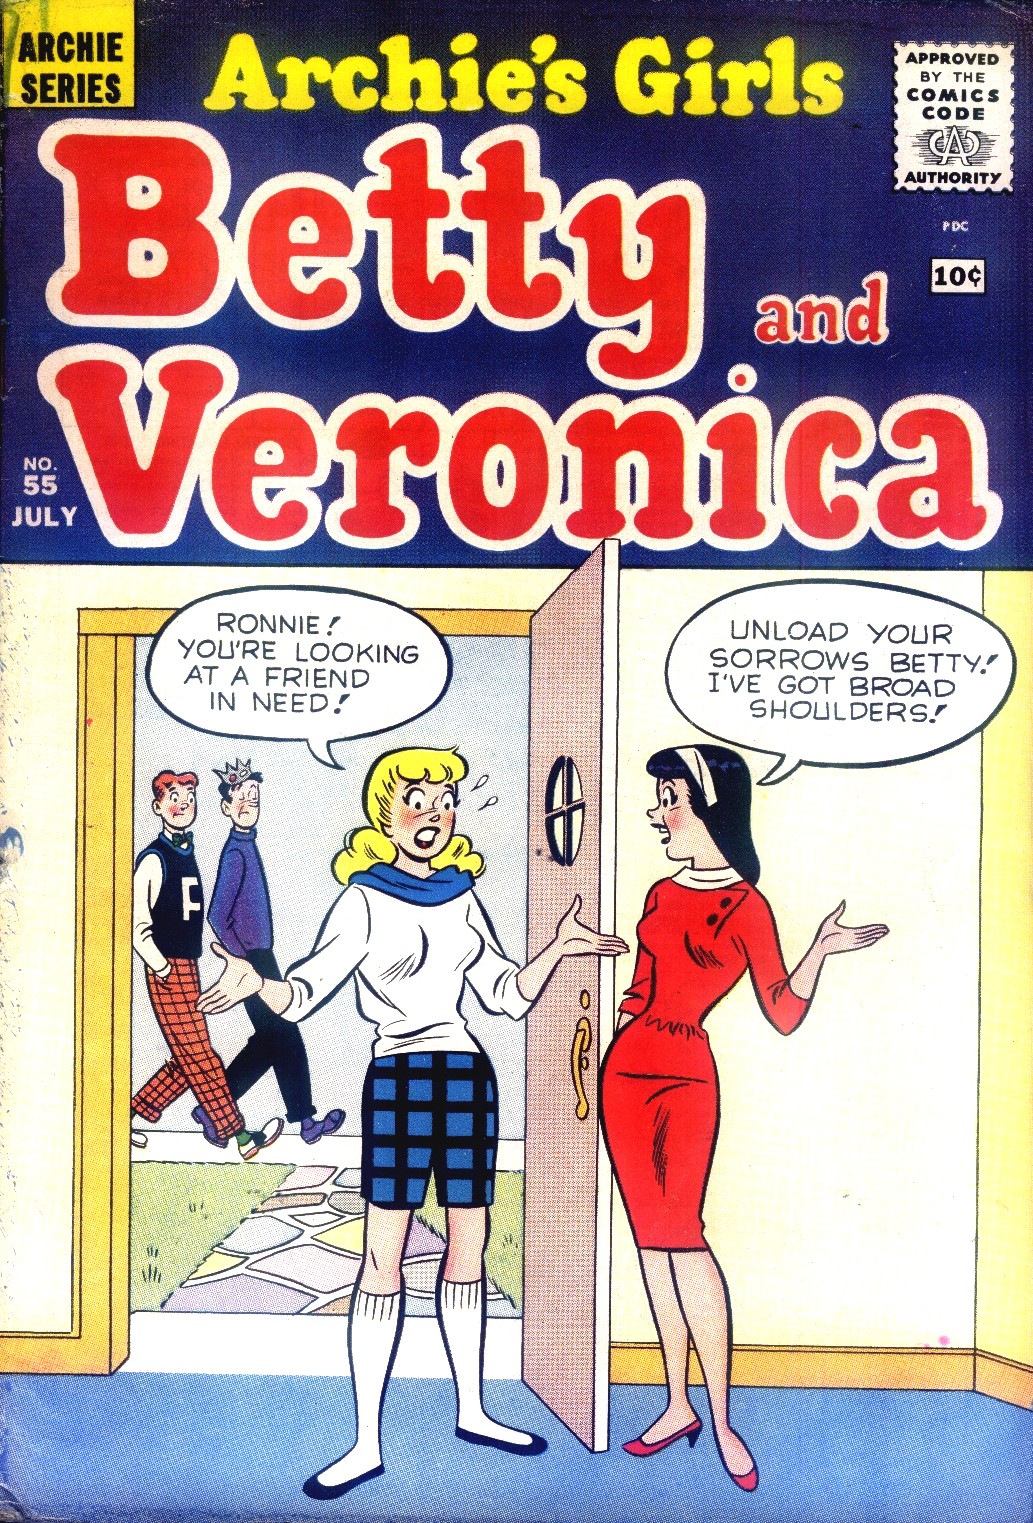 Read online Archie's Girls Betty and Veronica comic -  Issue #55 - 1